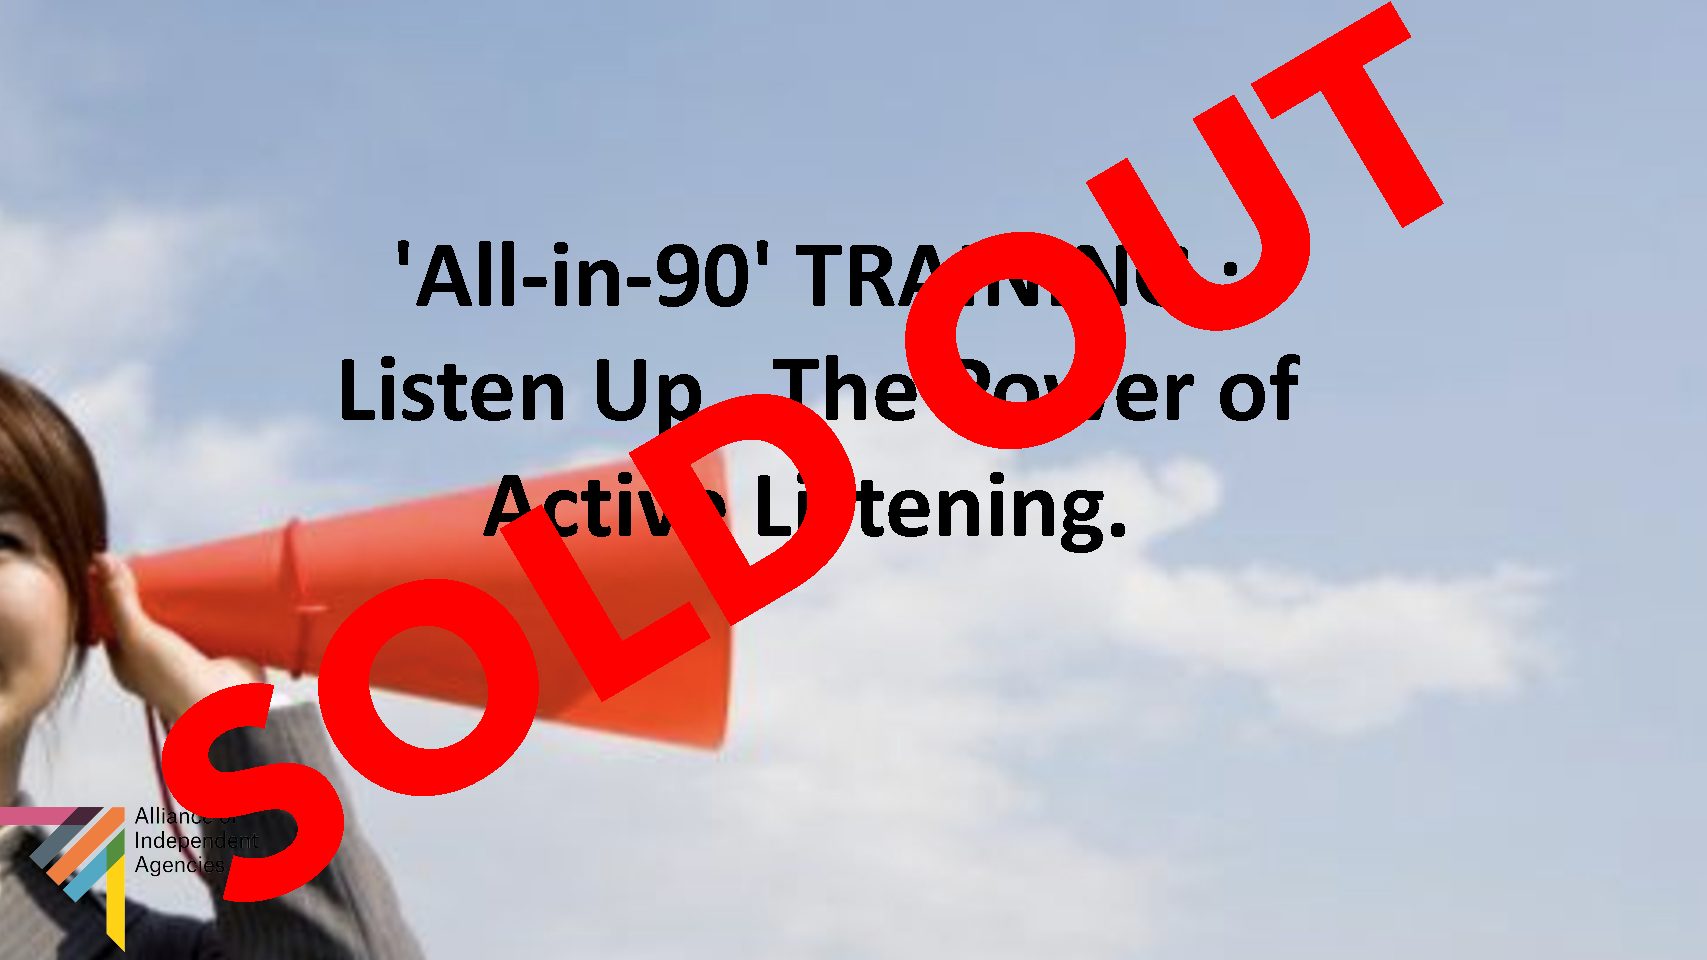 'All-in-90' TRAINING : Listen Up...The Power of Active Listening